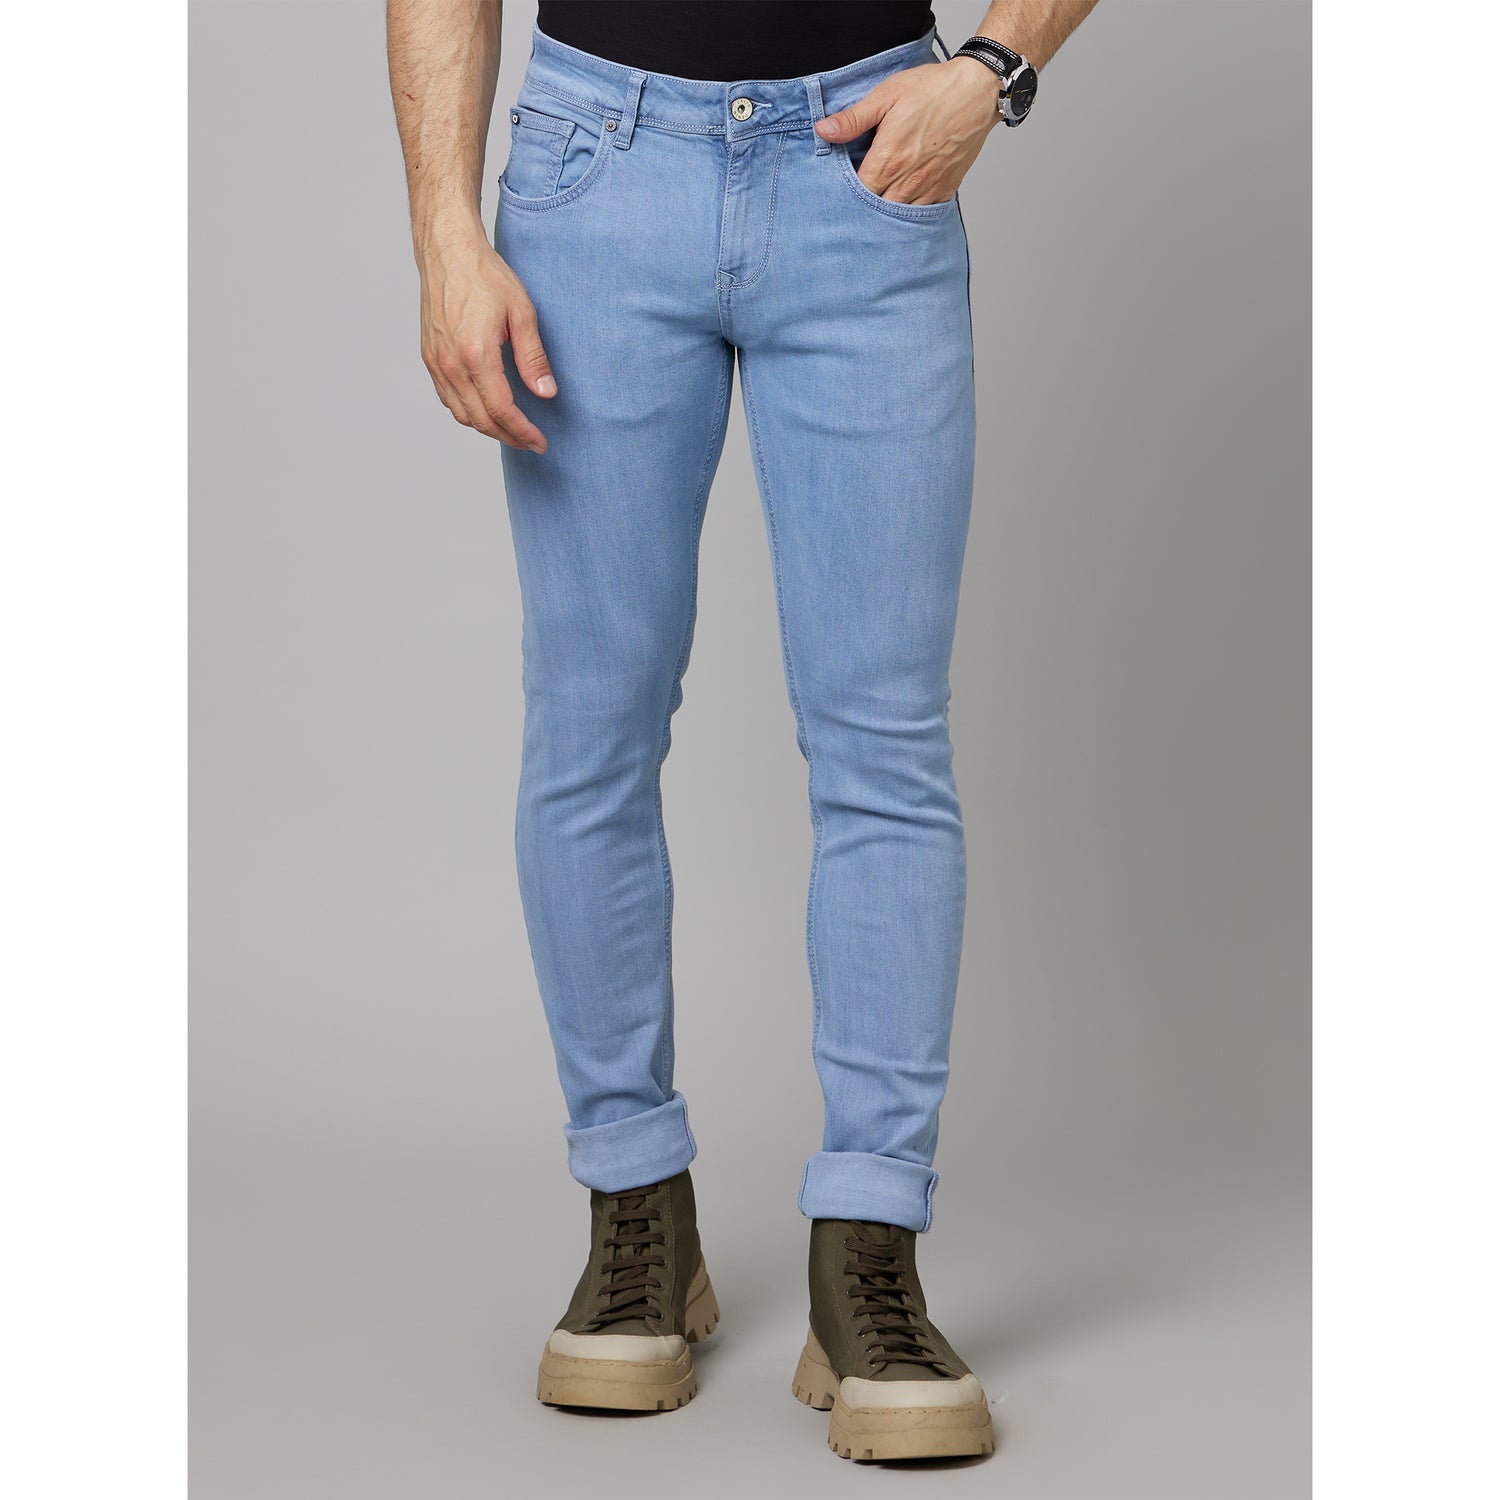 Blue Mid-Rise Jean Skinny Fit Clean Look Heavy Fade Jeans (COECOBLEACH225)